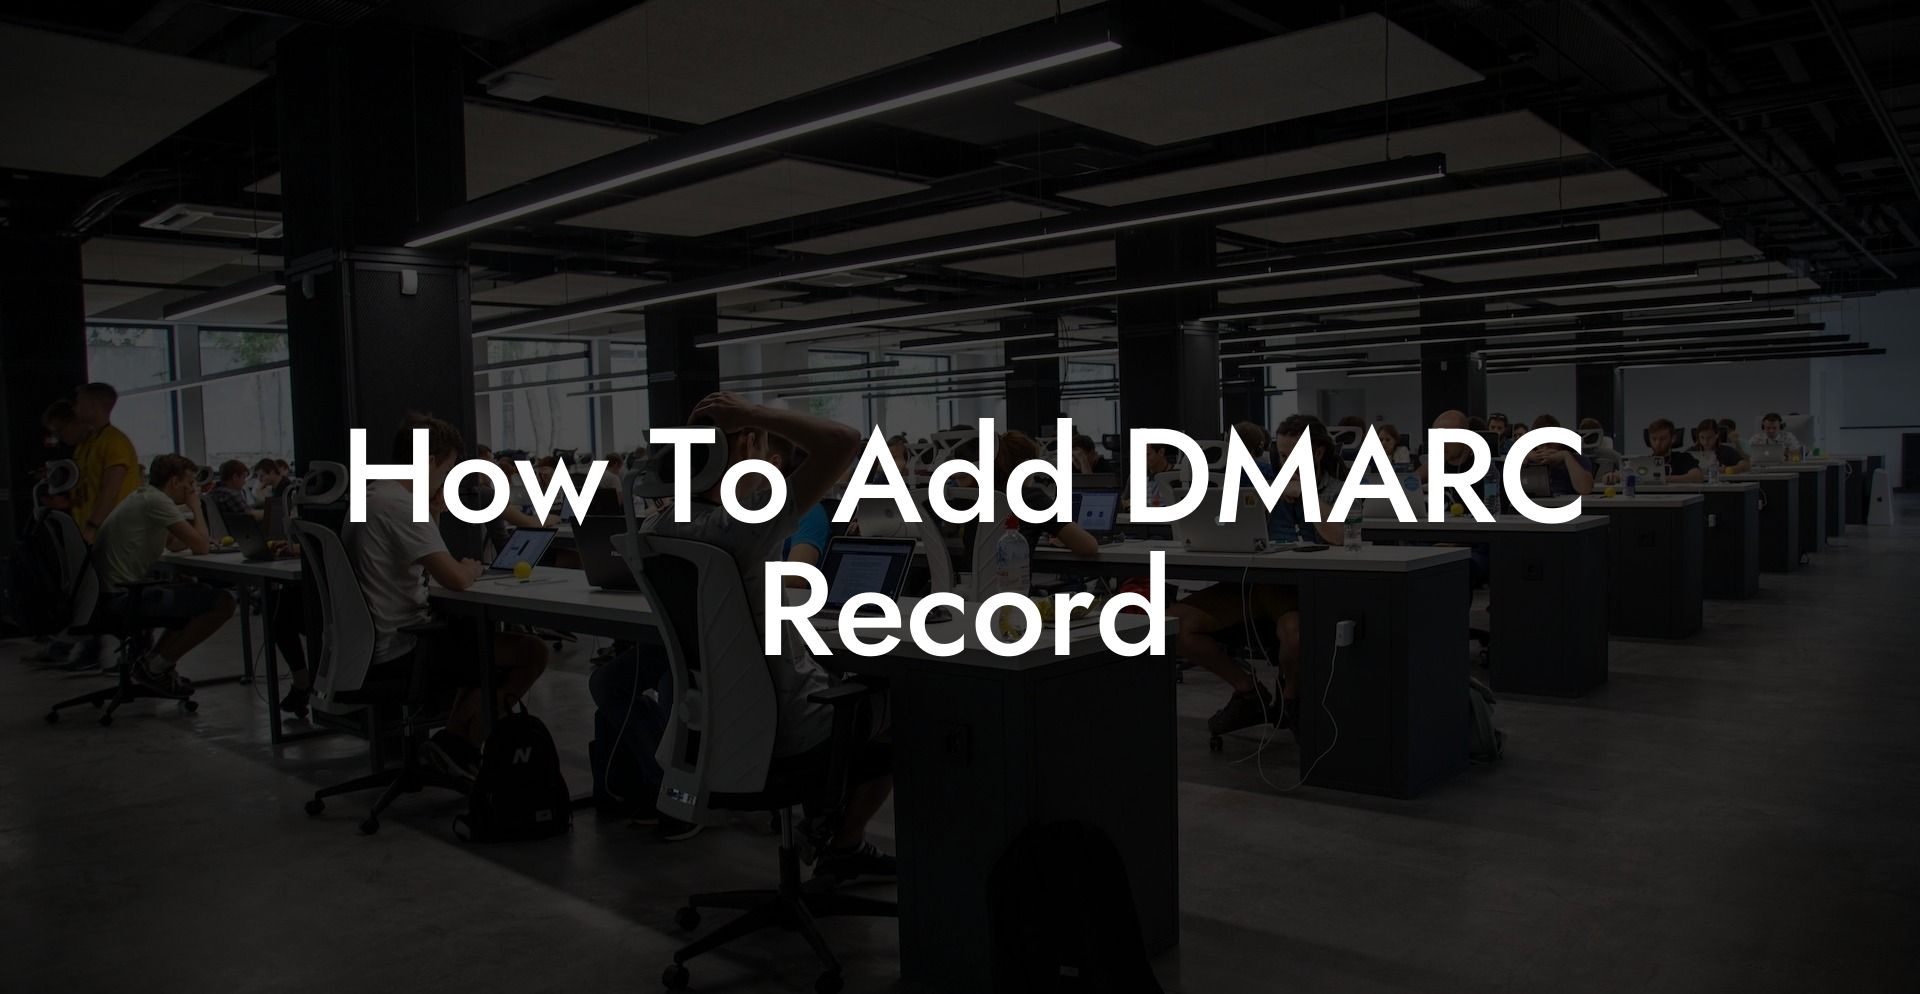 How To Add DMARC Record